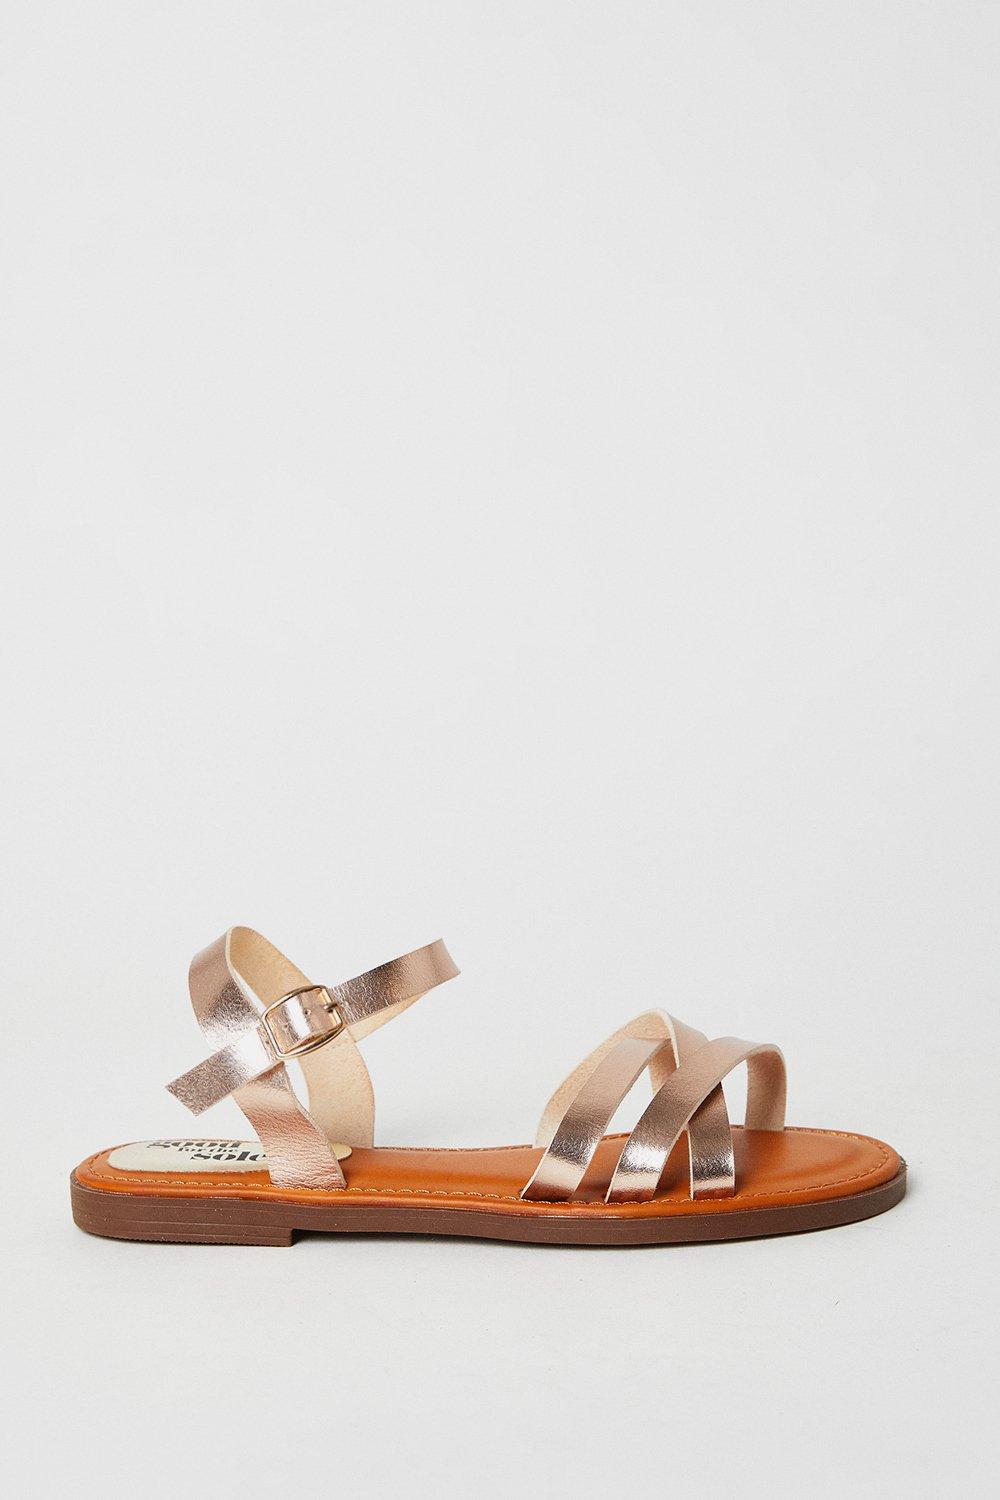 Women’s Good For The Sole: Melanie Comfort Cross Strap Flat Sandals - rose gold - 8